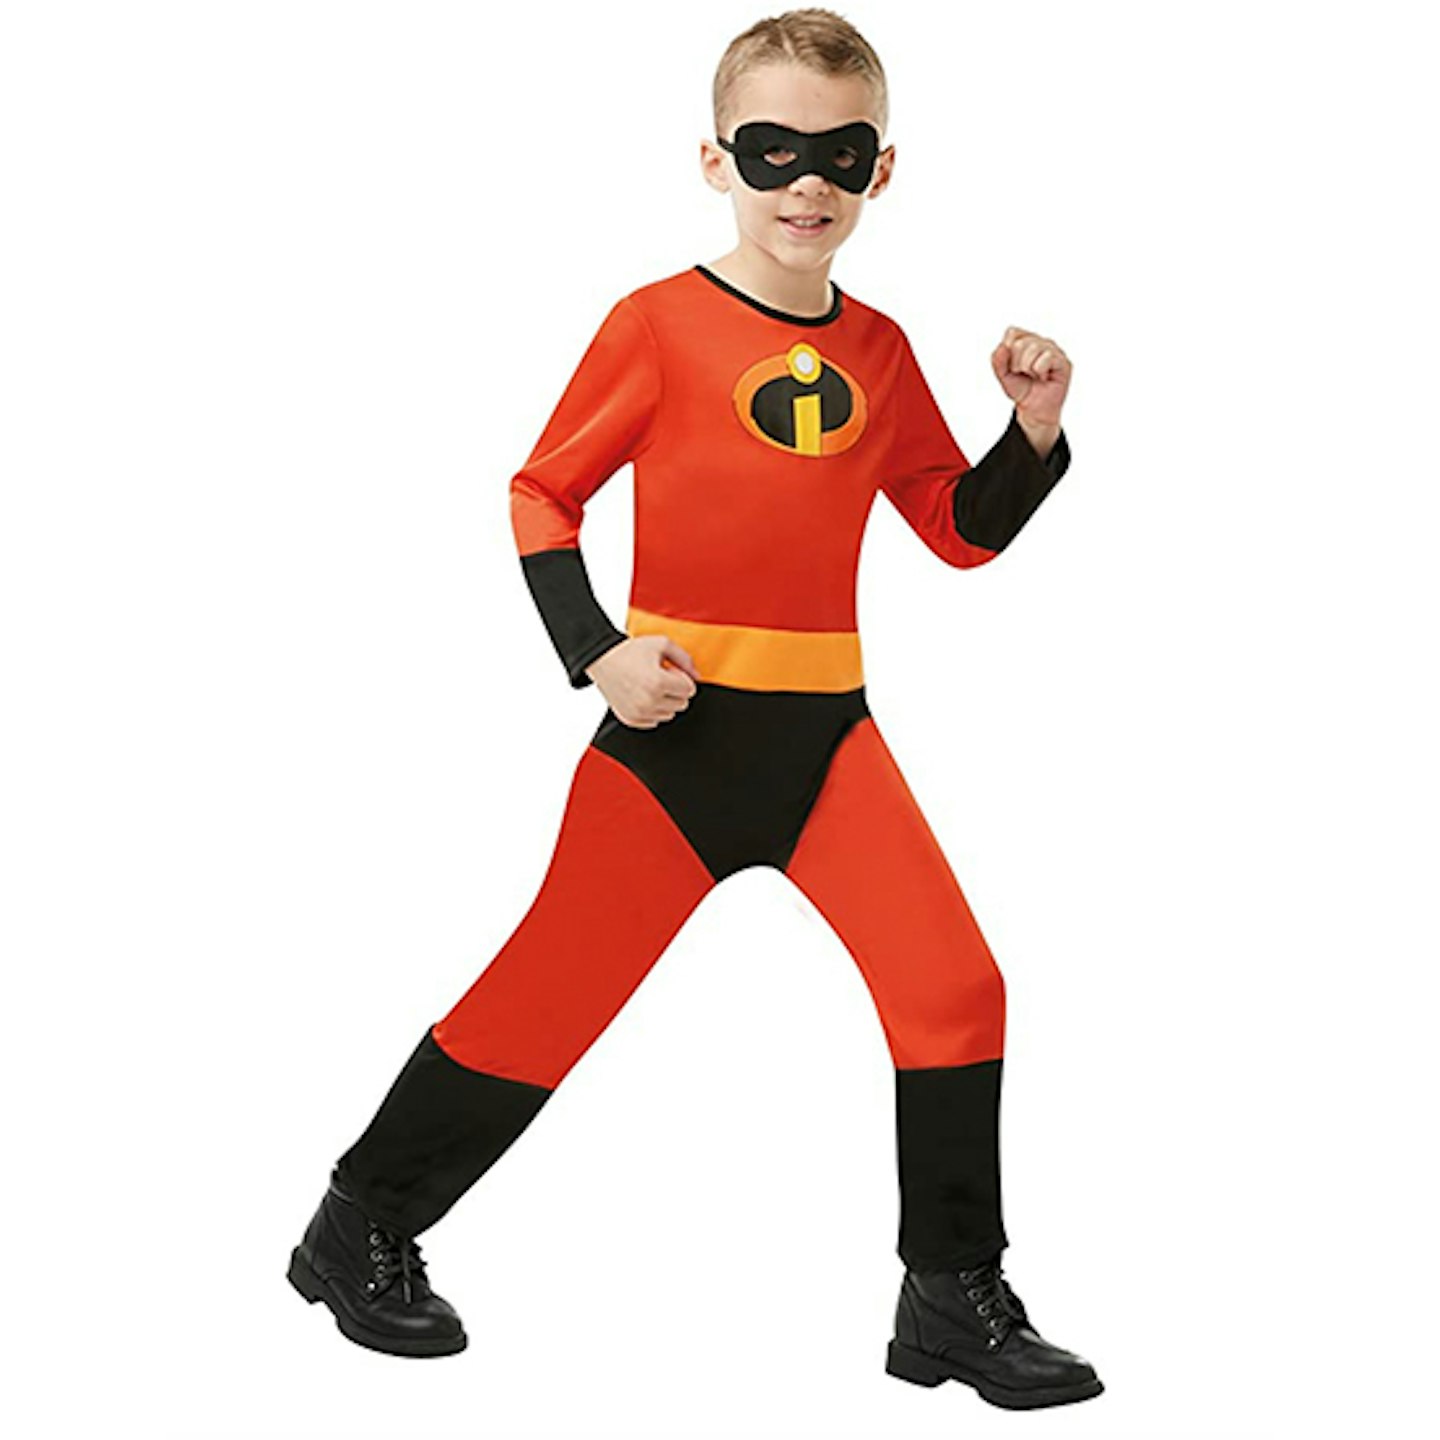 Rubie's Official Disney Pixar, Incredibles 2 Childs Costume